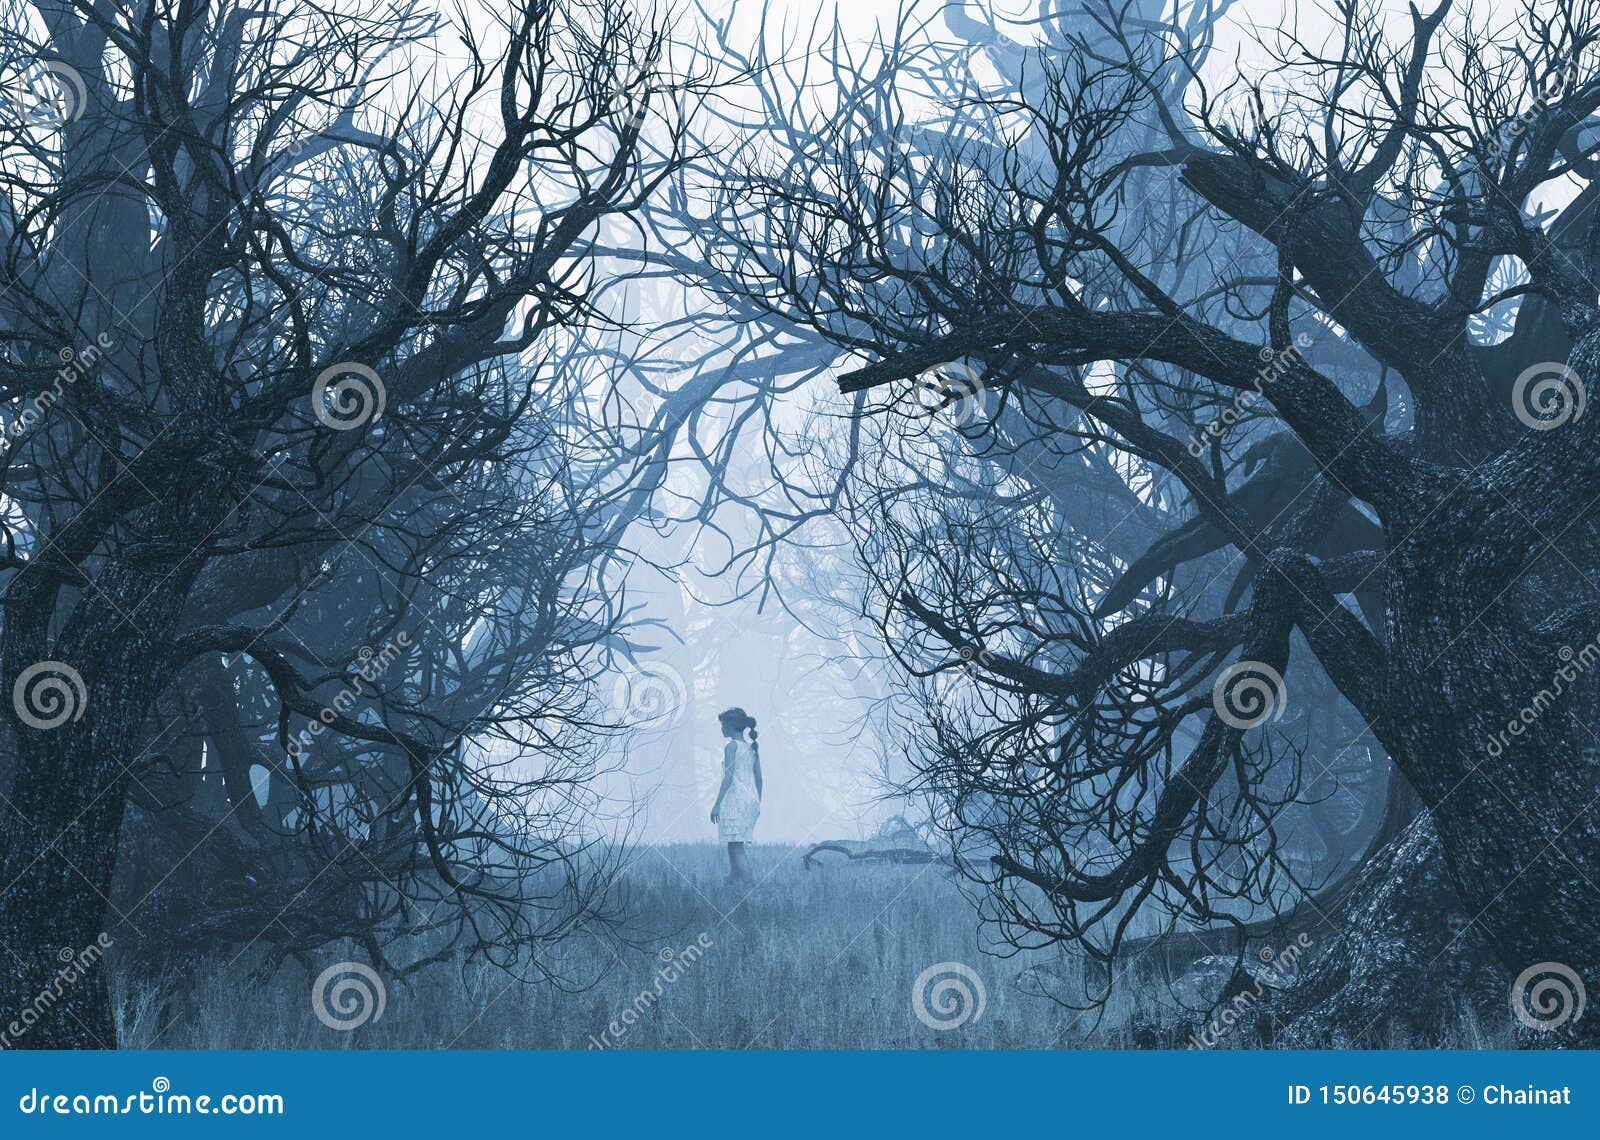 girl lost in creepy forest